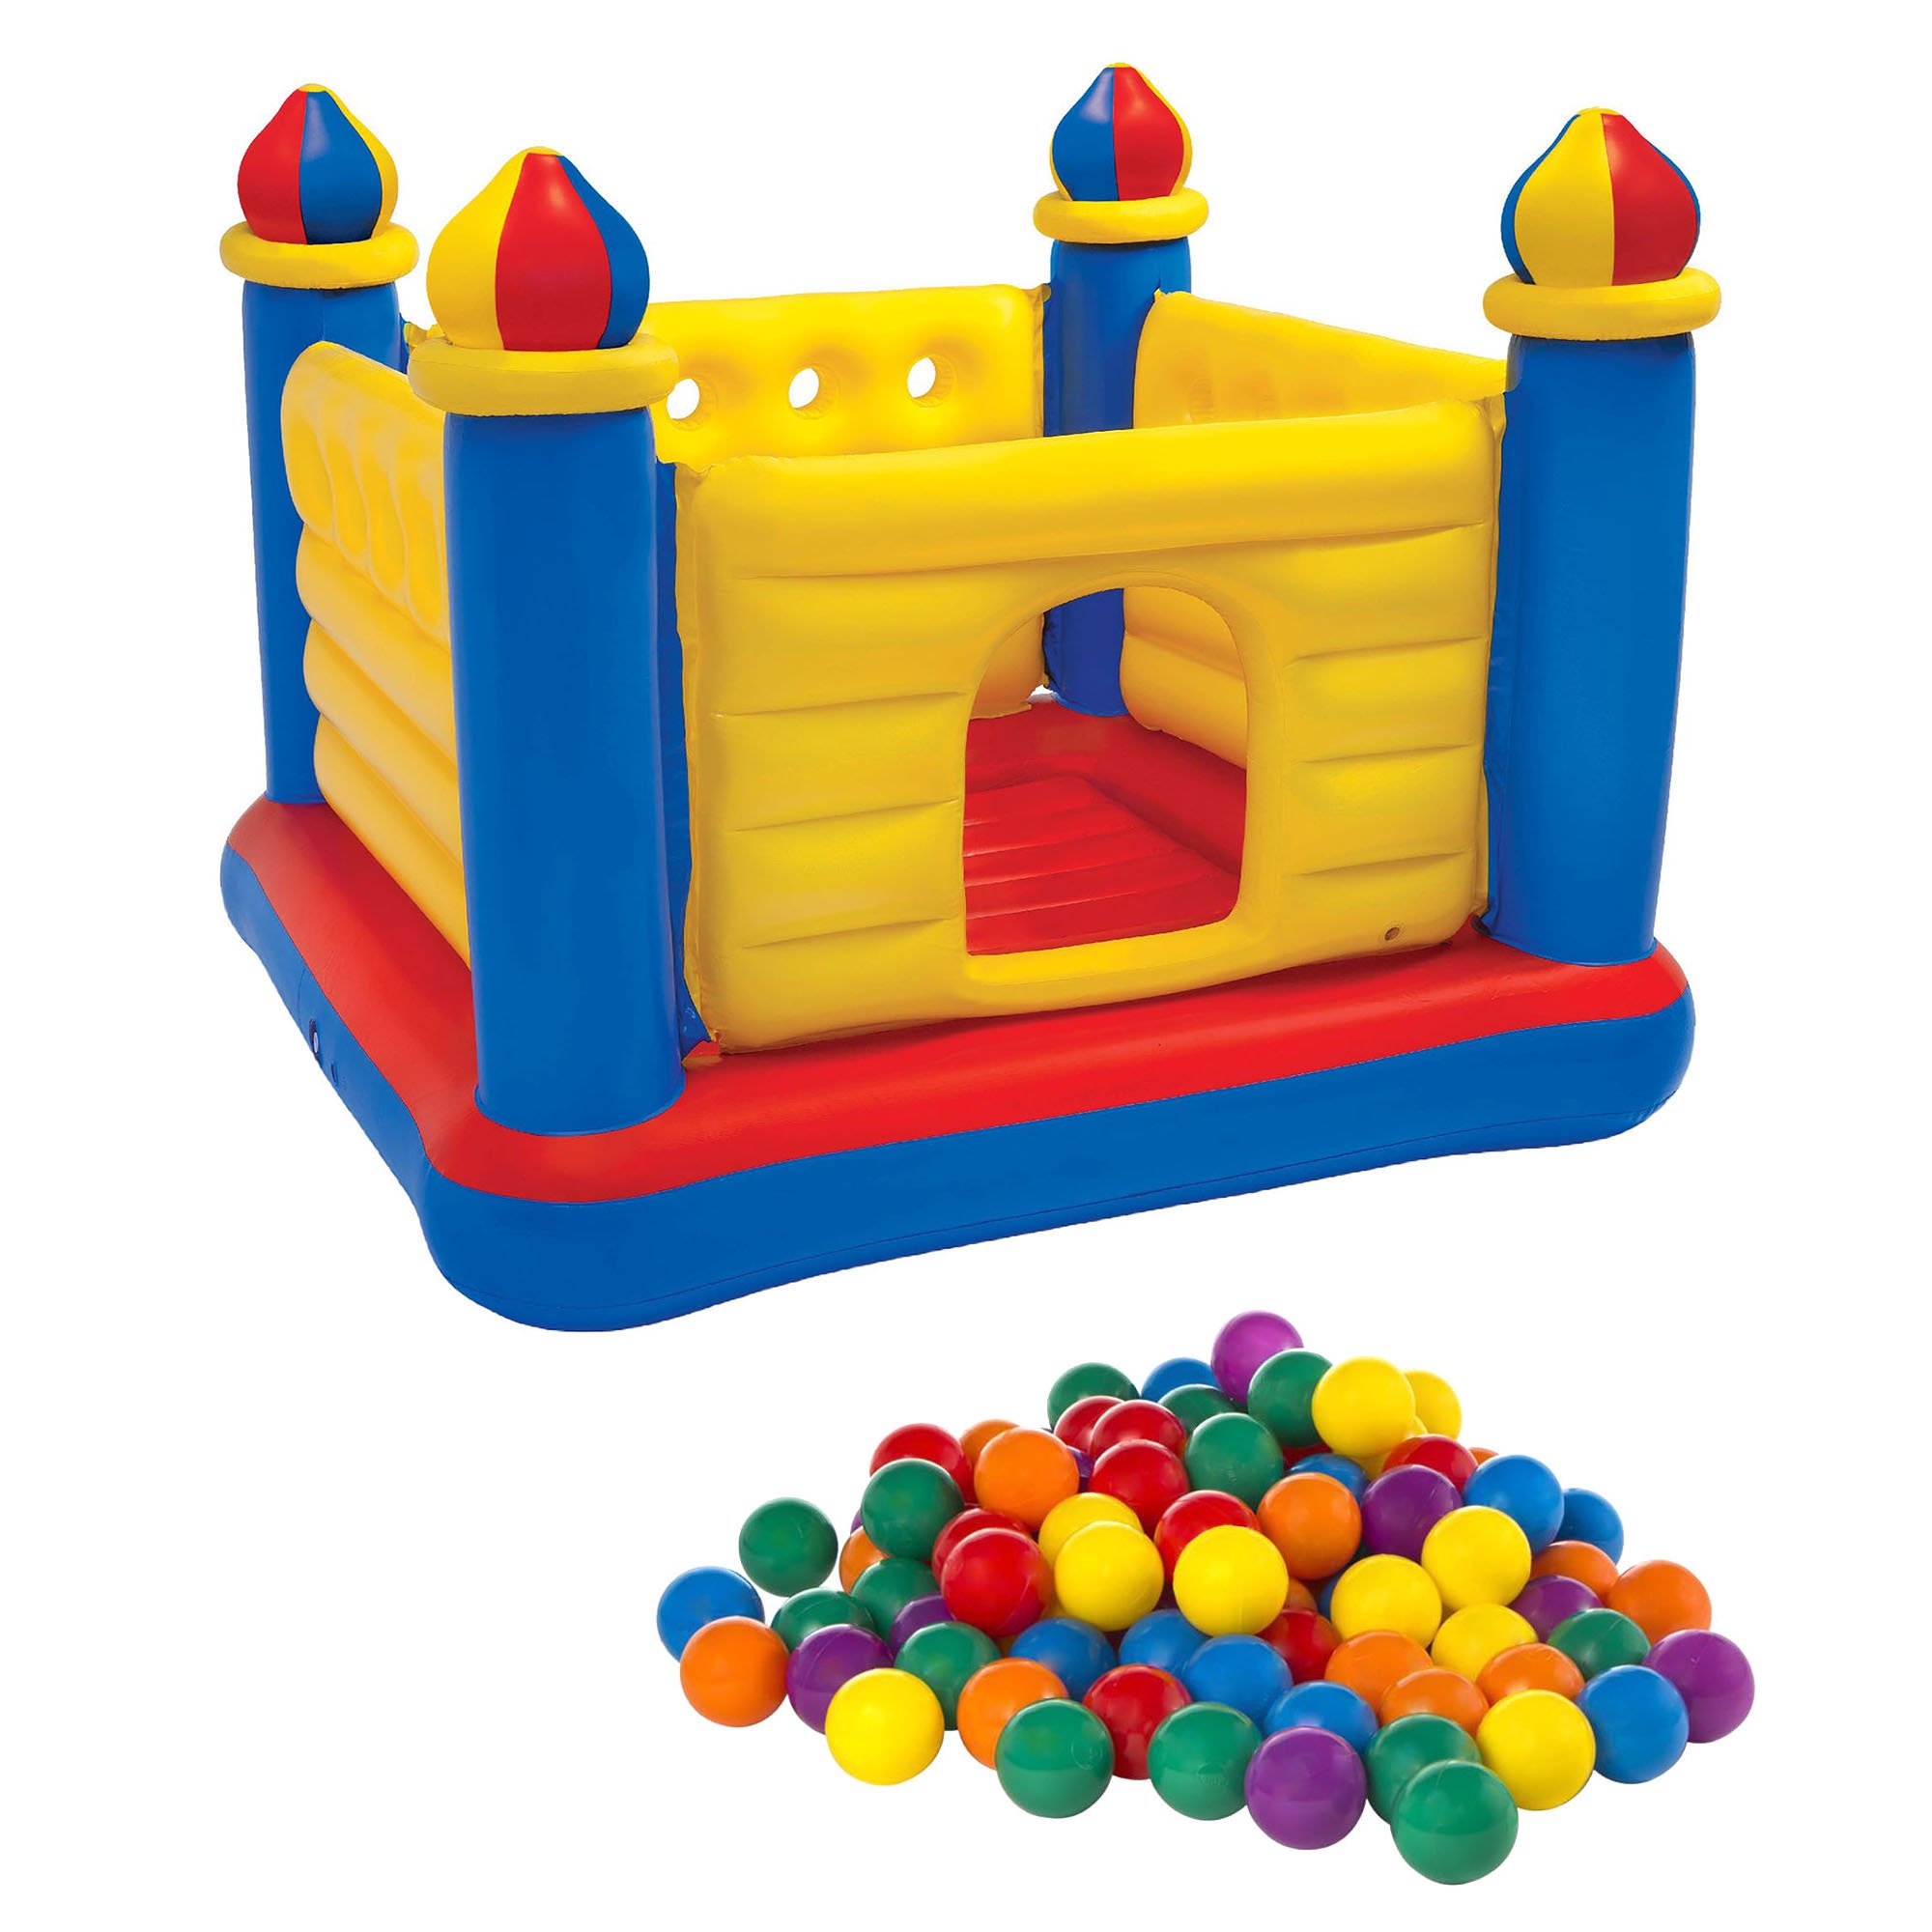 Intex Inflatable Jump O Lene Ball Pit Outdoor Castle Bouncer with 100 Play Balls